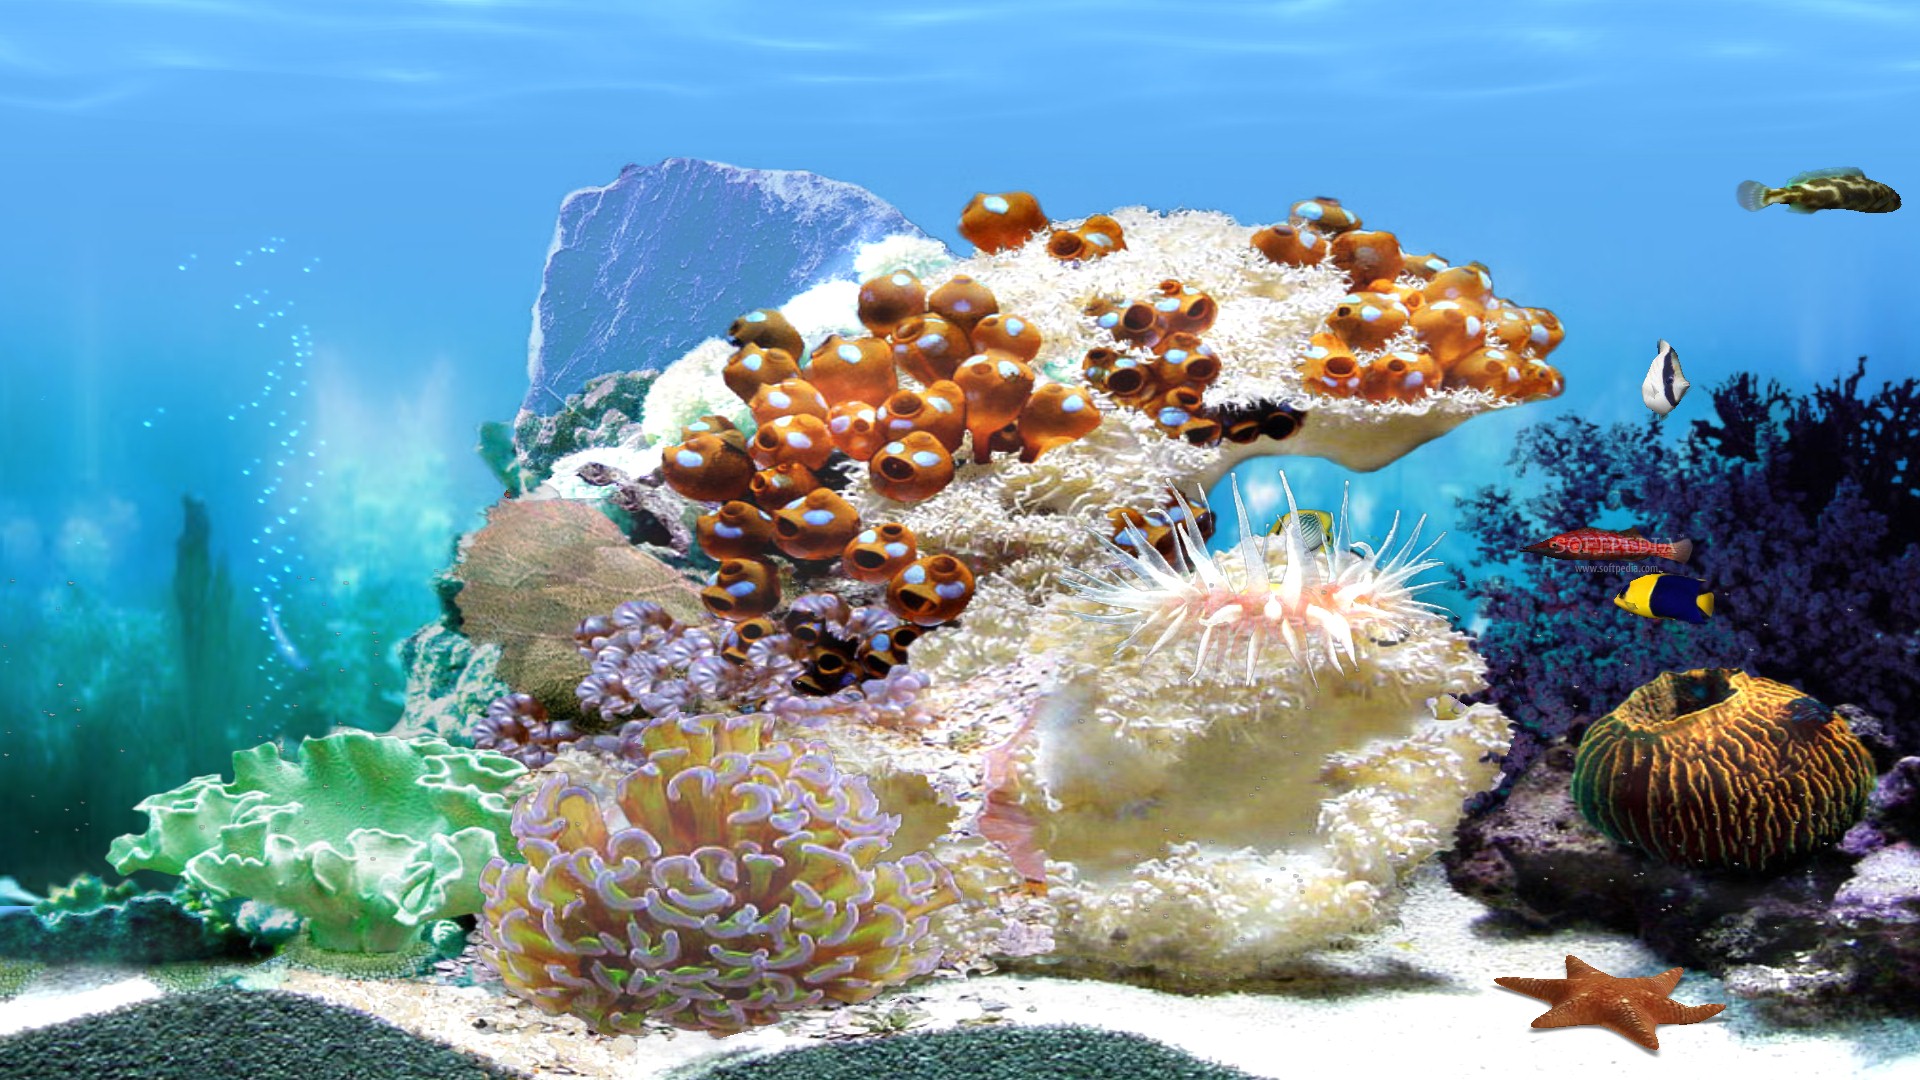 Free download Amazing 3D Aquarium With the help of this screensaver you